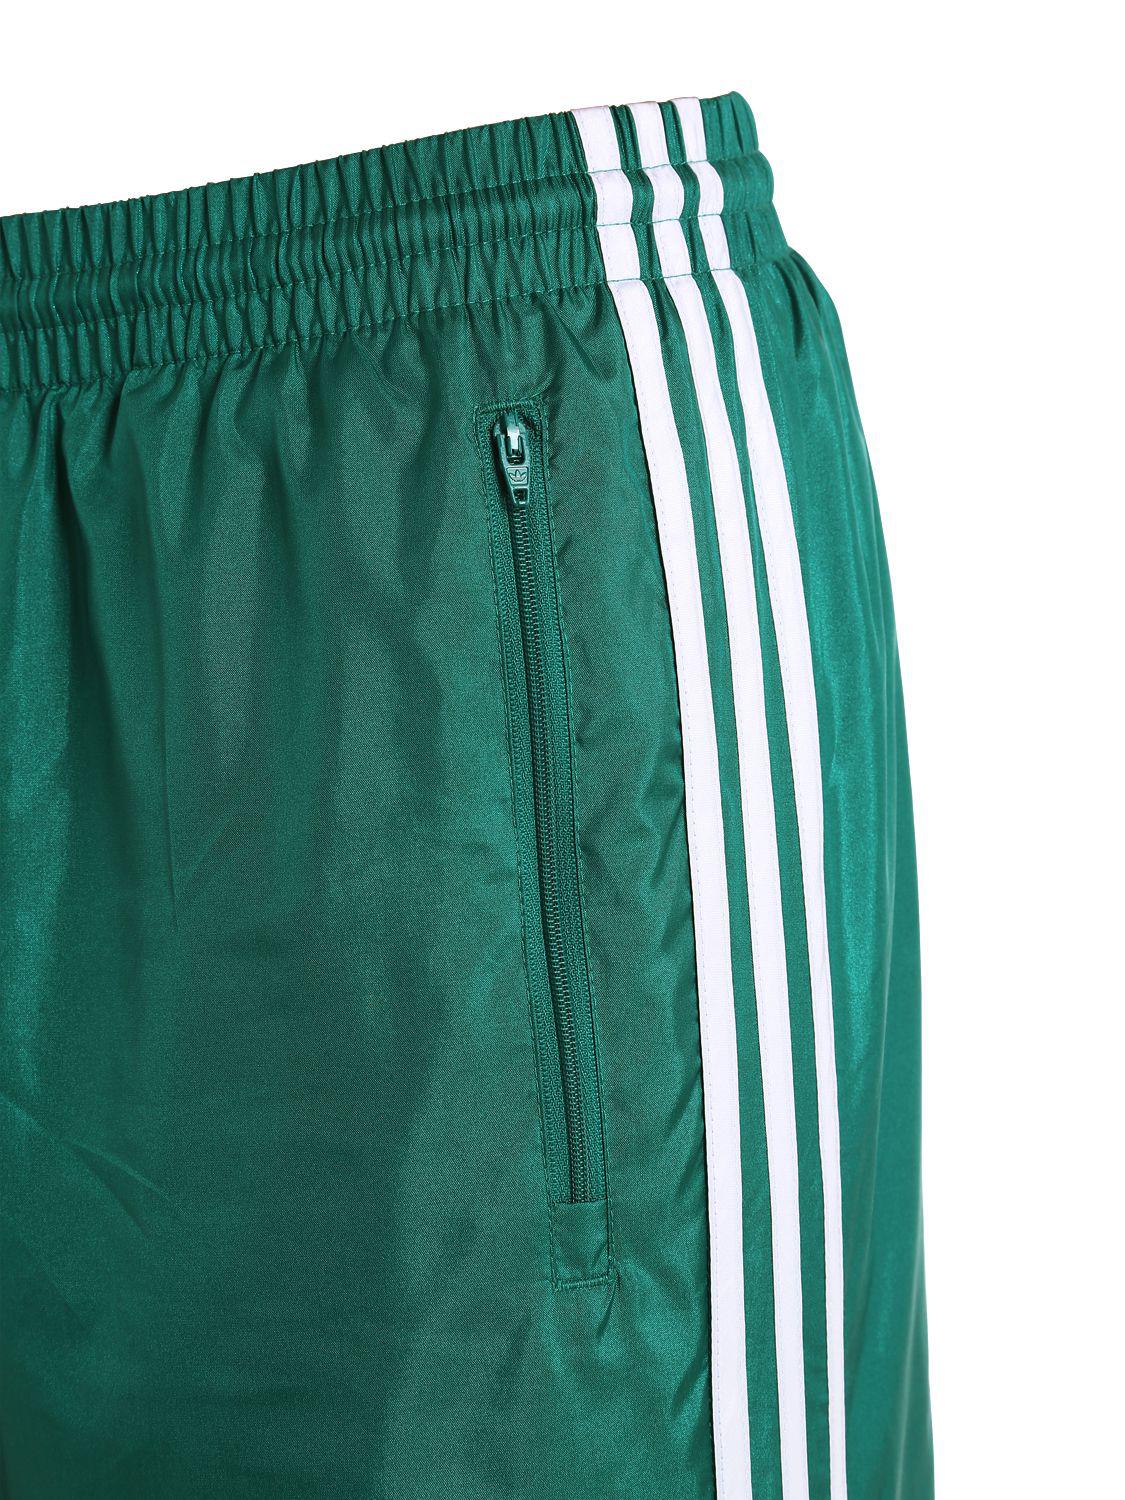 adidas Originals Synthetic Clr-84 Woven Nylon Track Pants in Green for ...